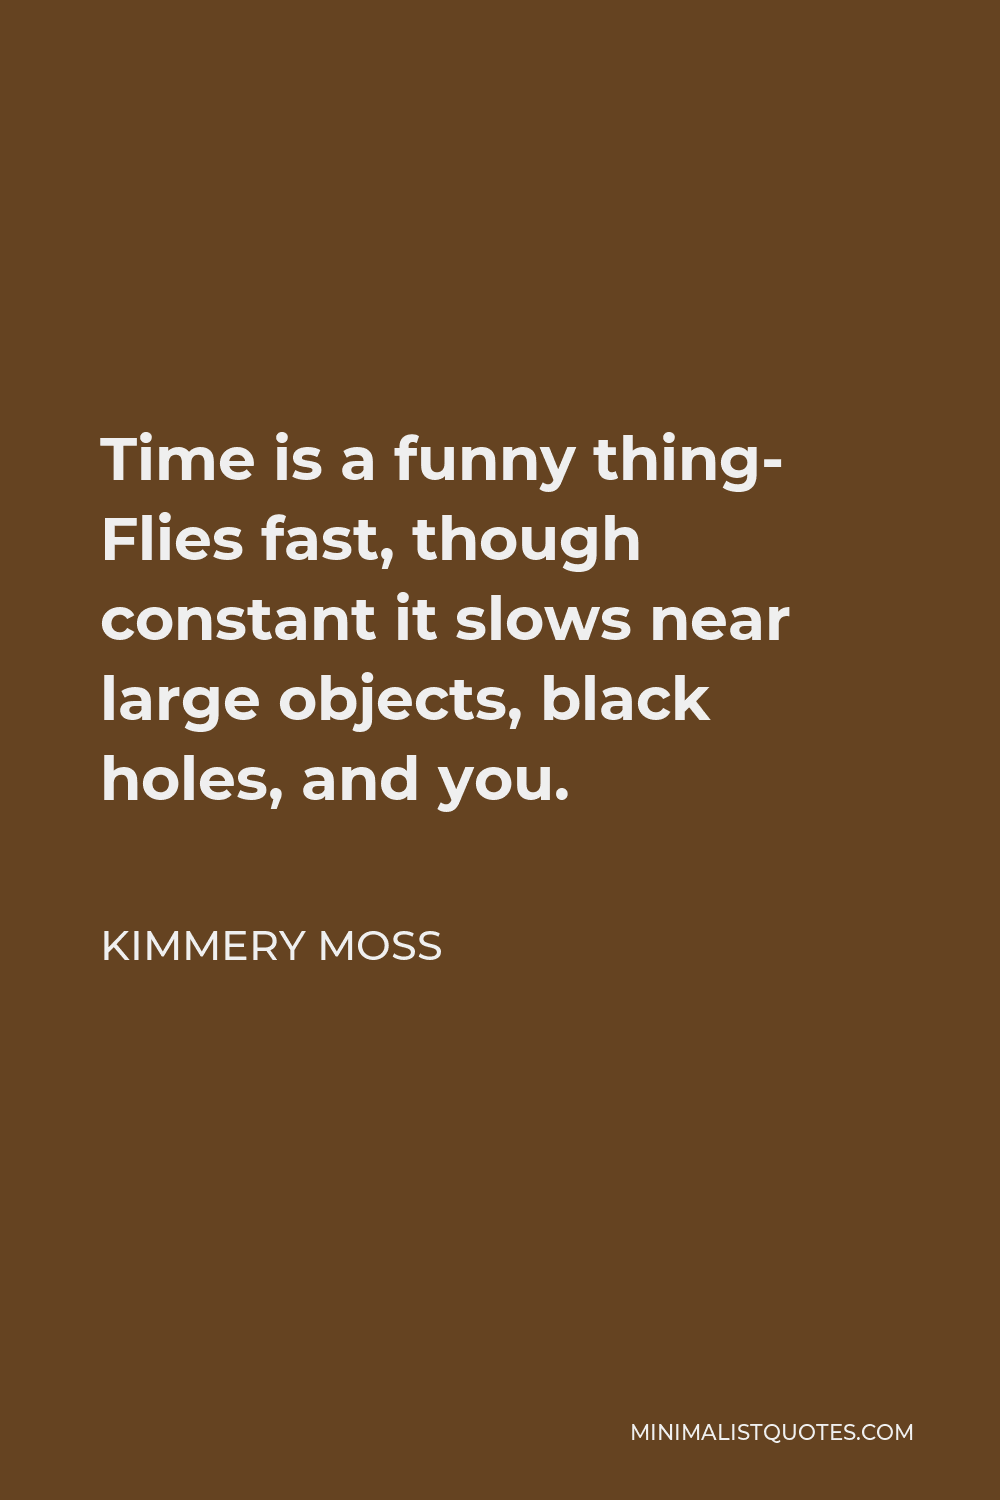 Kimmery Moss Quote - Time is a funny thing- Flies fast, though constant it slows near large objects, black holes, and you.